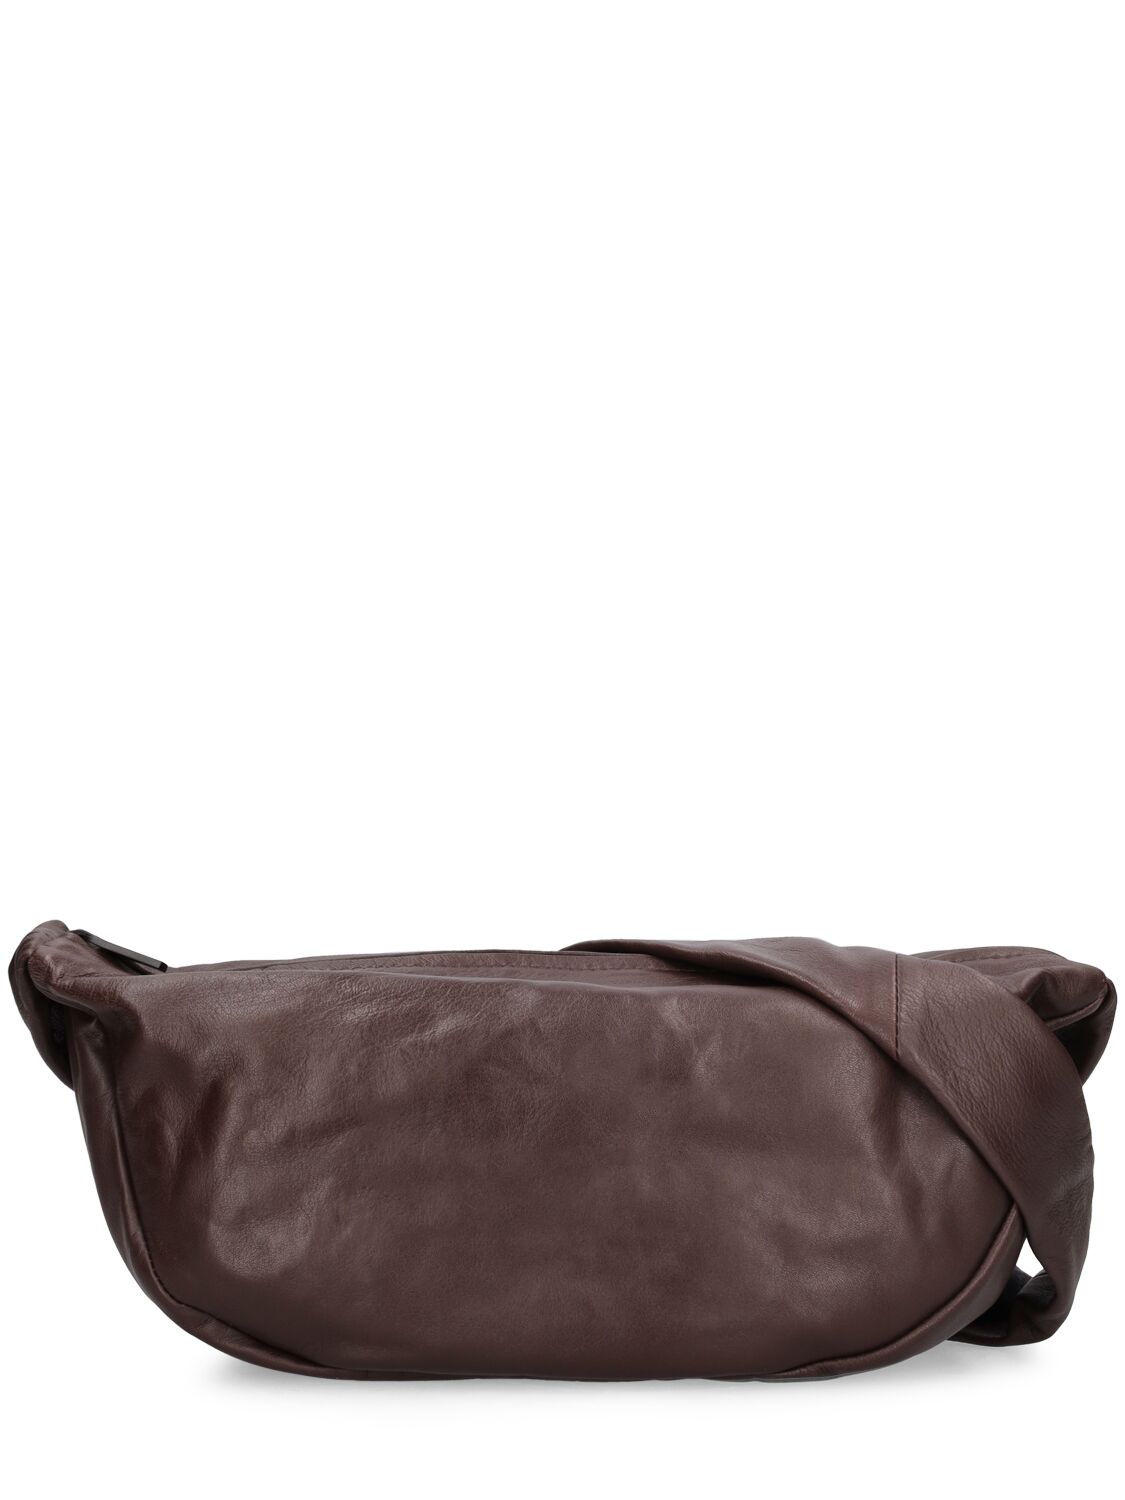 Image of Small Crescent Leather Bag